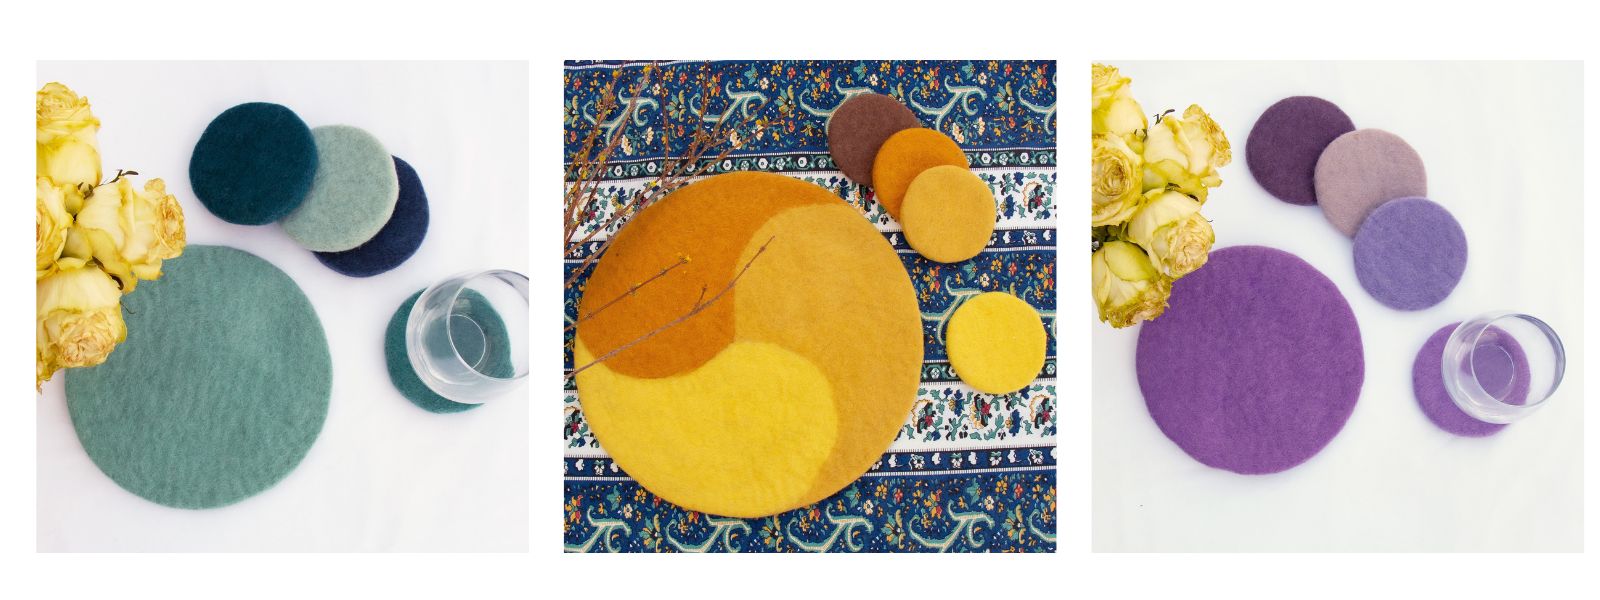 Colorful felt trivets, coasters, placemats crafted from felt in Nepal.